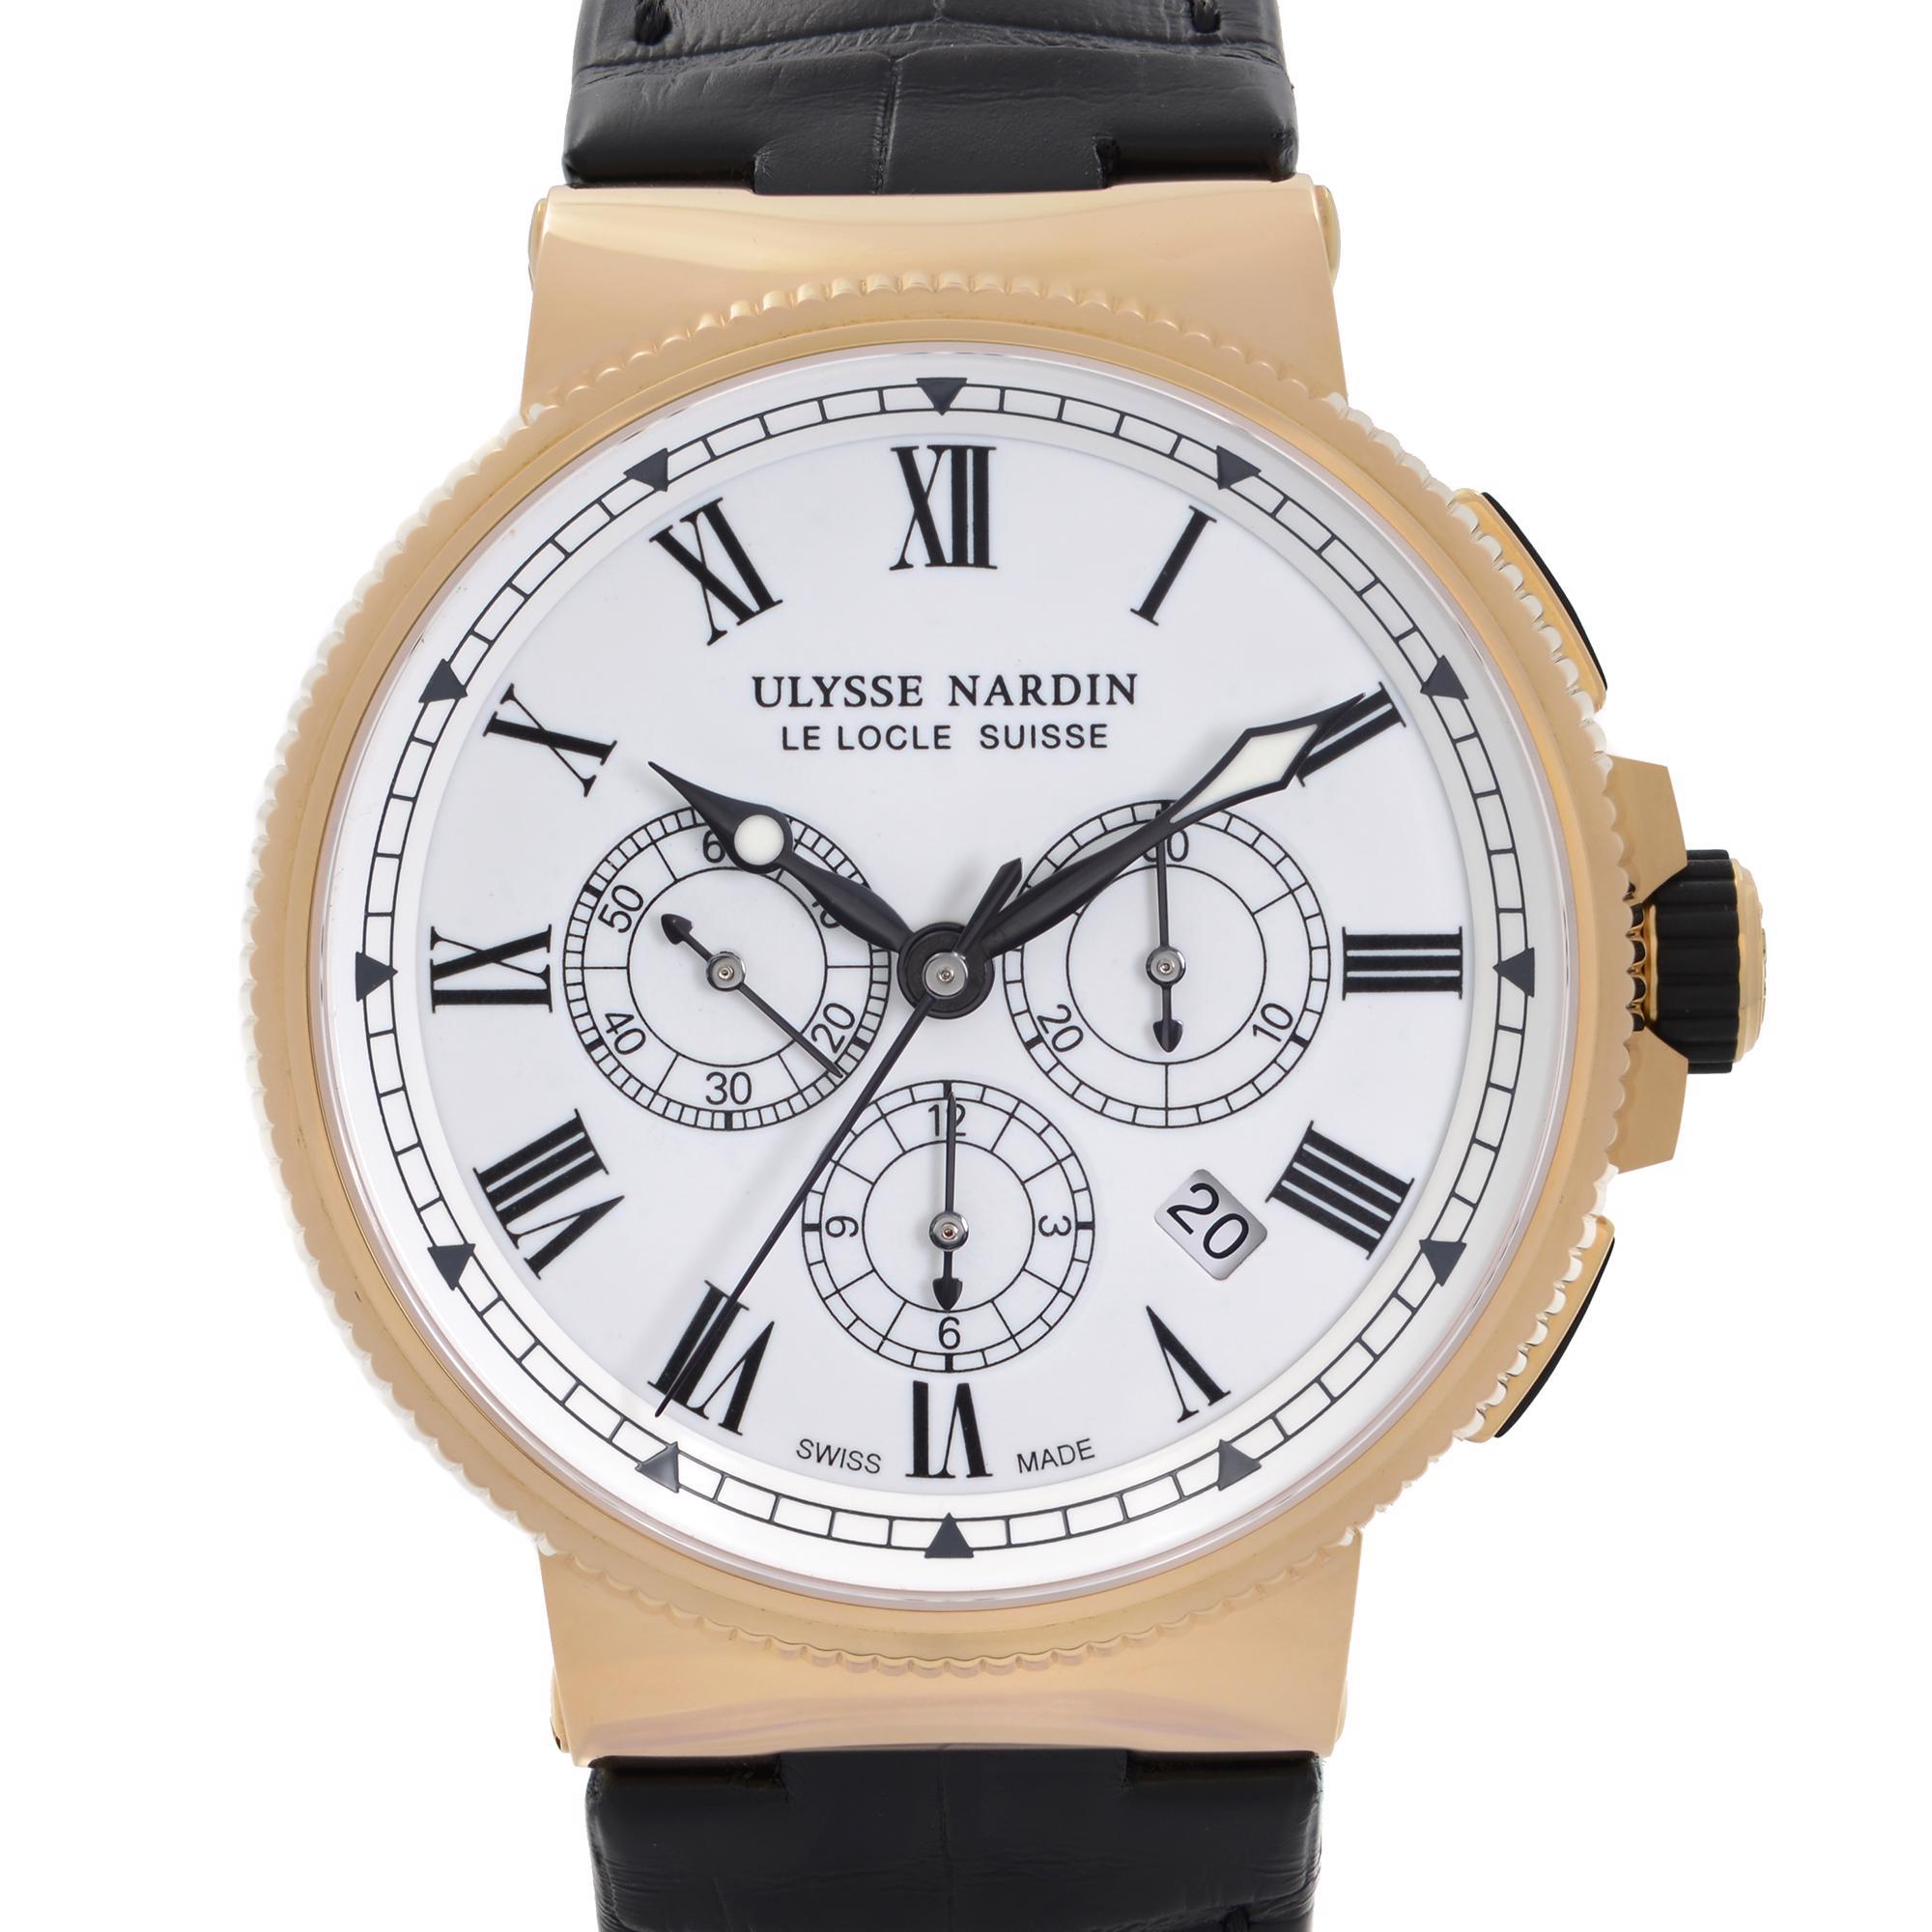 Unworn Limited Edition Ulysse Nardin Marine 43mm Chronograph 18k Yellow Gold White Dial 1506-150/LE. This Beautiful Timepiece is Powered by an Automatic Movement and Features: 18k Rose Gold Case with a Black Leather Strap, Fixed 18k Rose Gold Bezel,